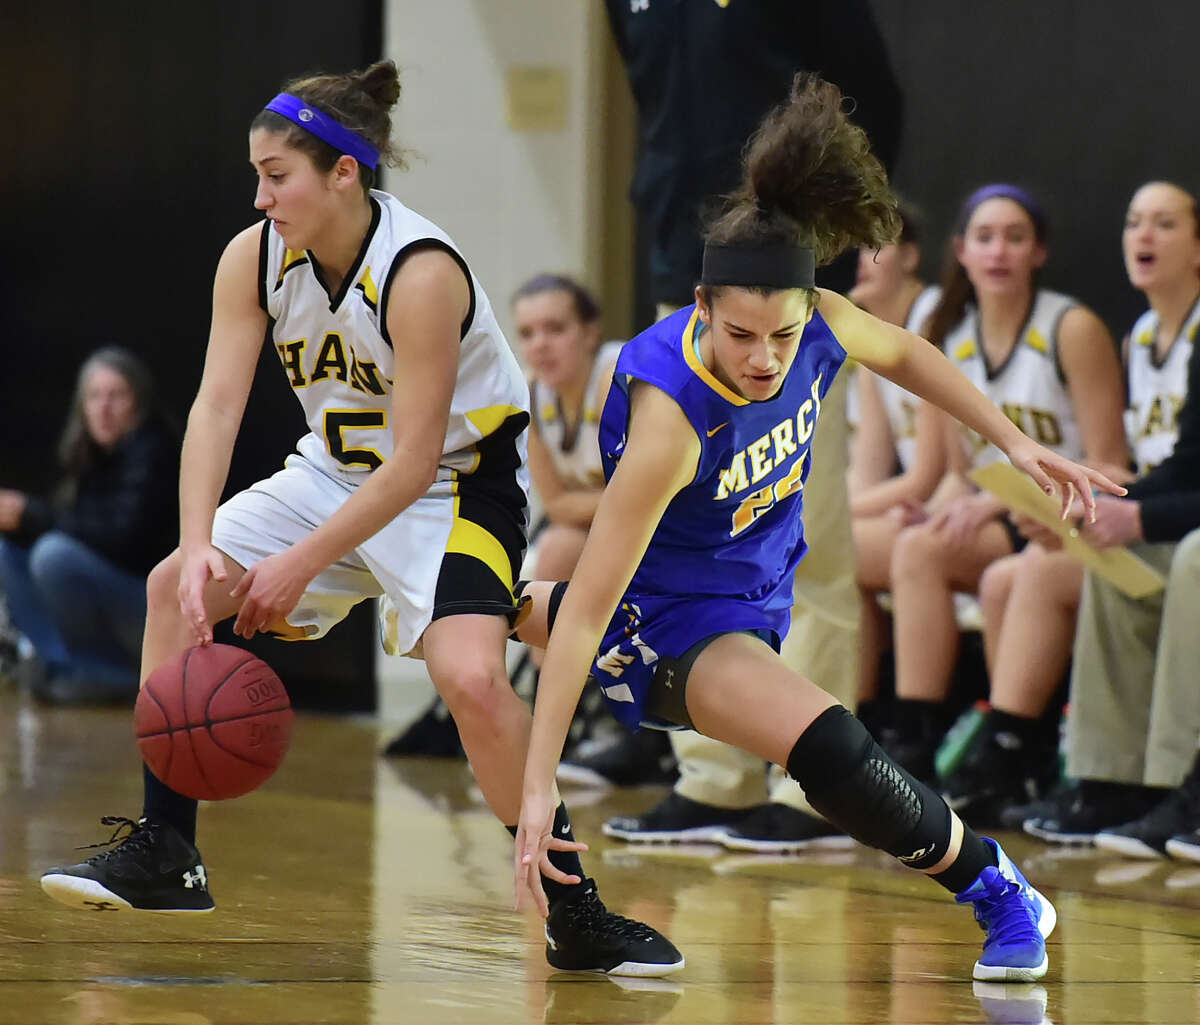 (Catherine Avalone – New Haven Register) Mercy junior Keri Kernisan attempts to steal back the ball from Hand’s Gillian Draemer defends in a 77-56 win for the Mercy Tigers, Wednesday, January 27, 2016, at Daniel Hand High School in Madison.